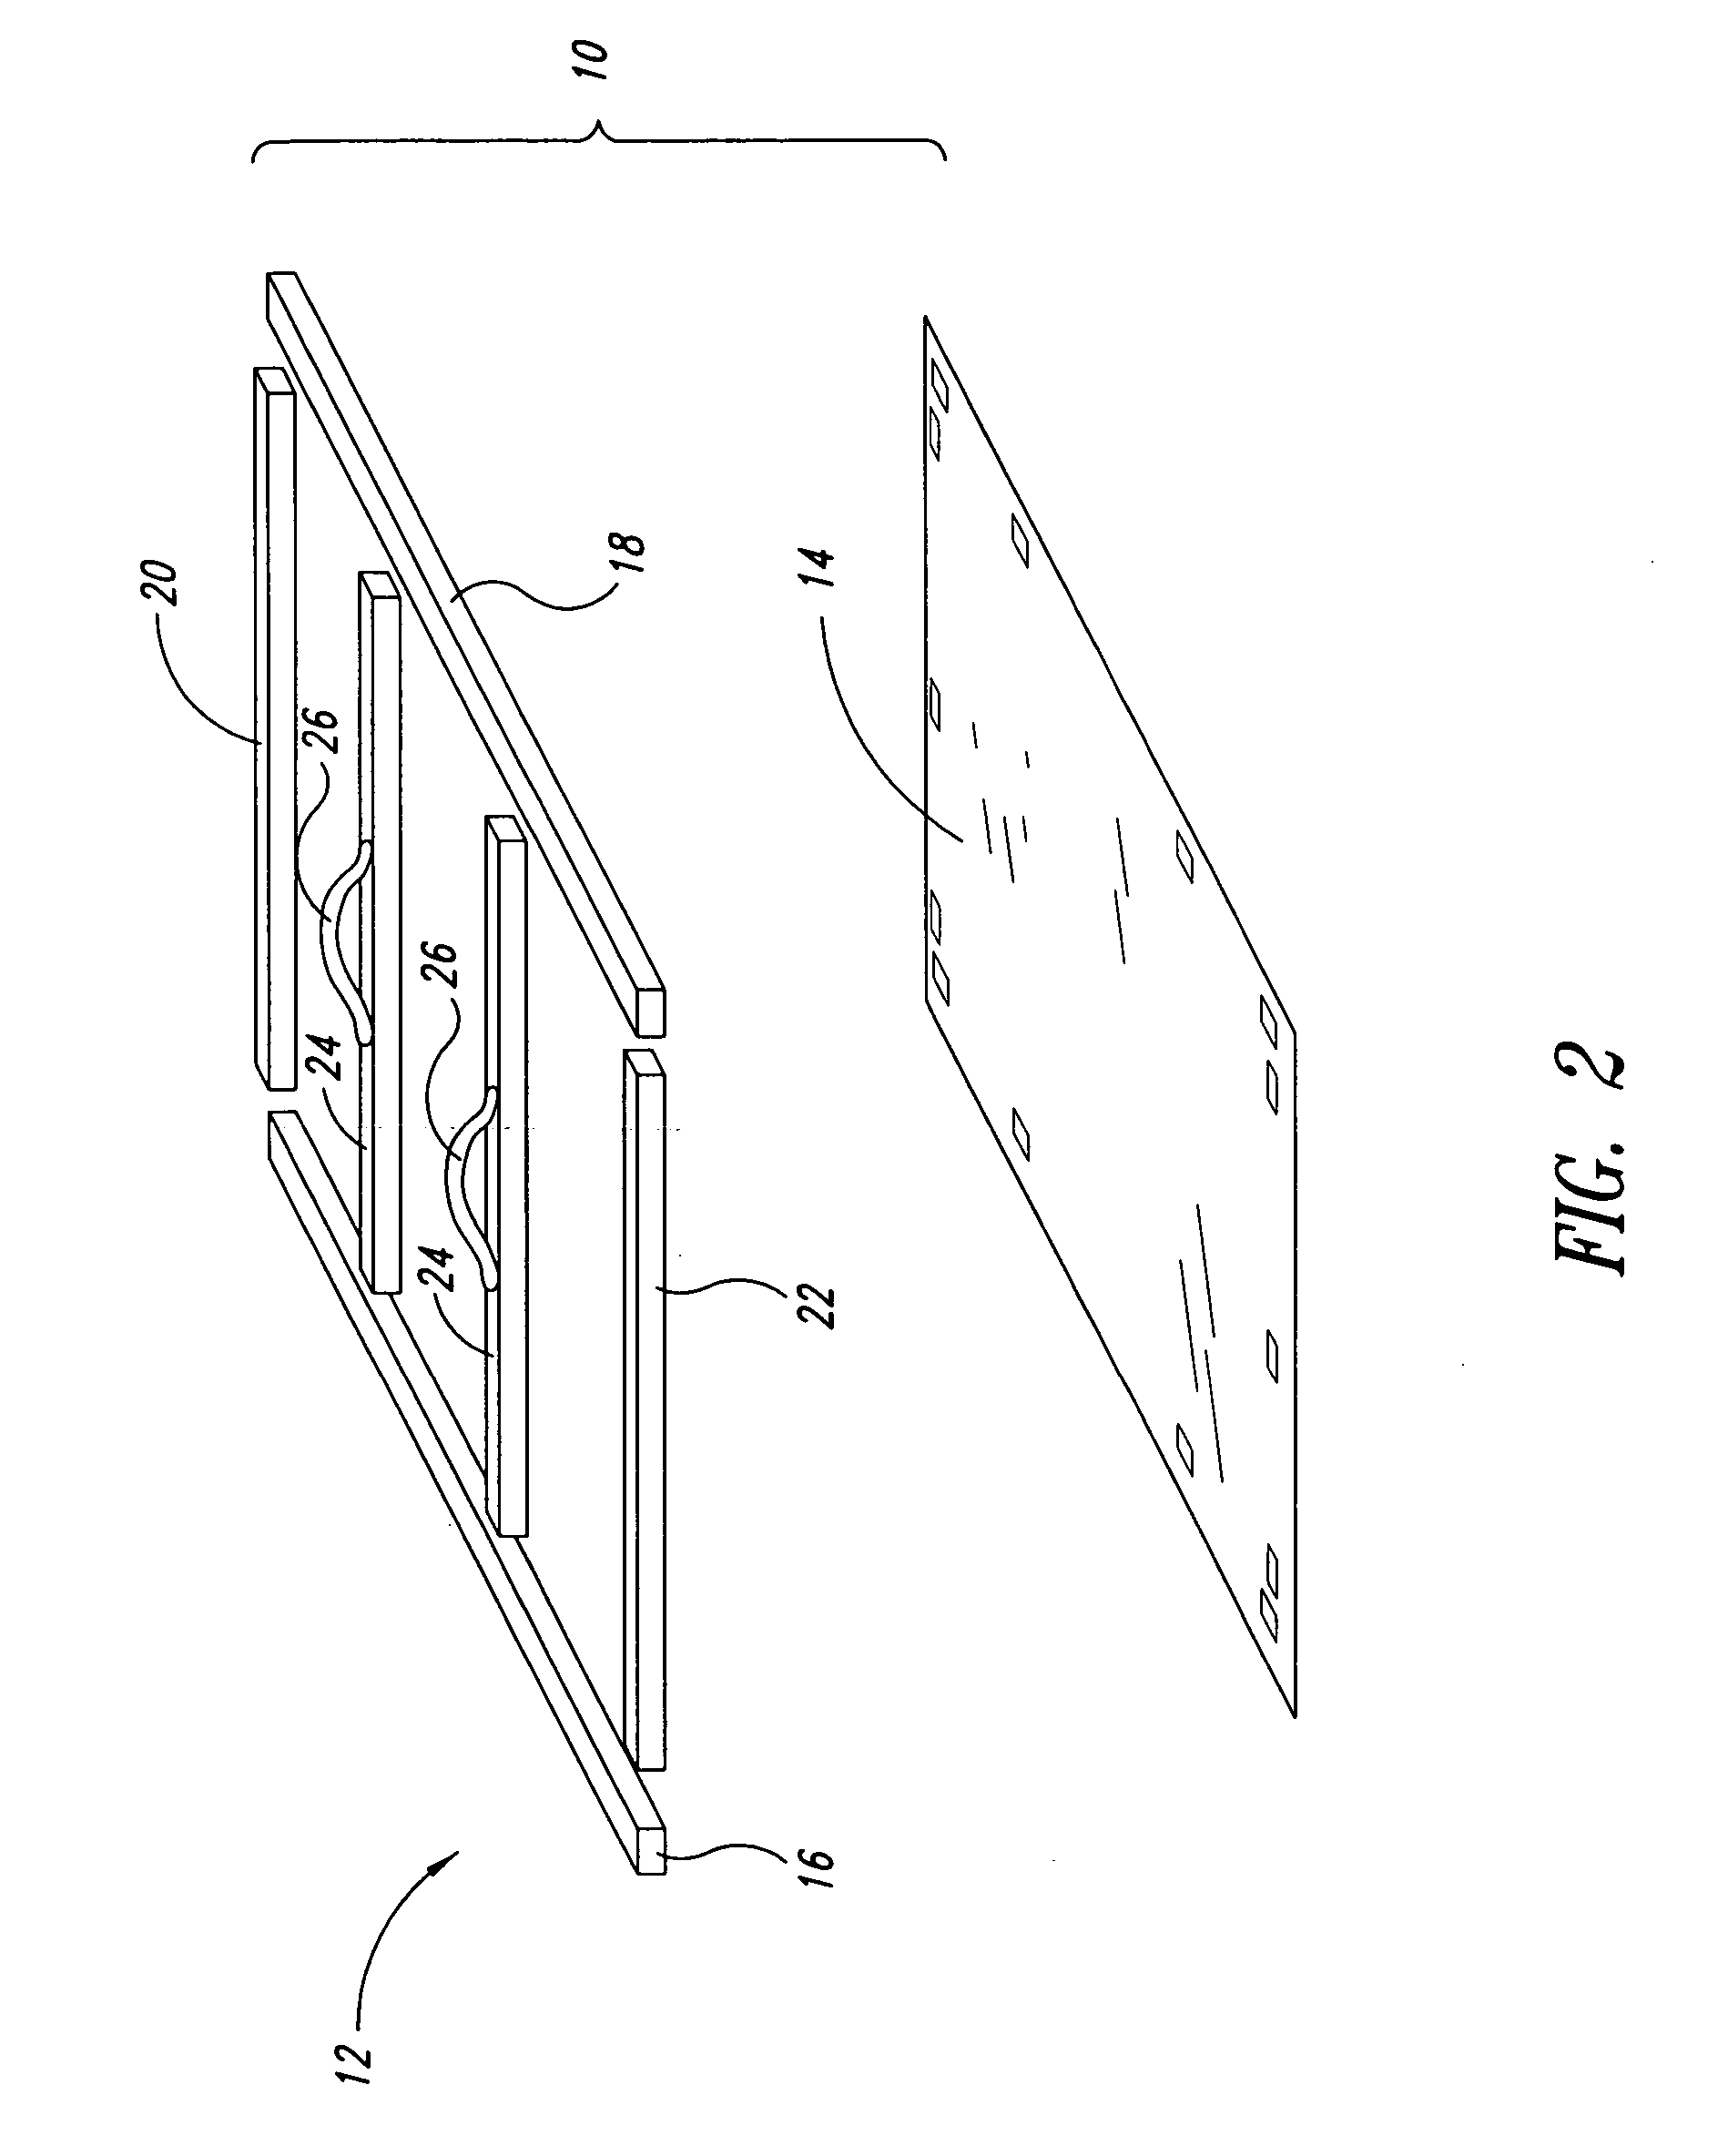 Spray shield and methods of using the same